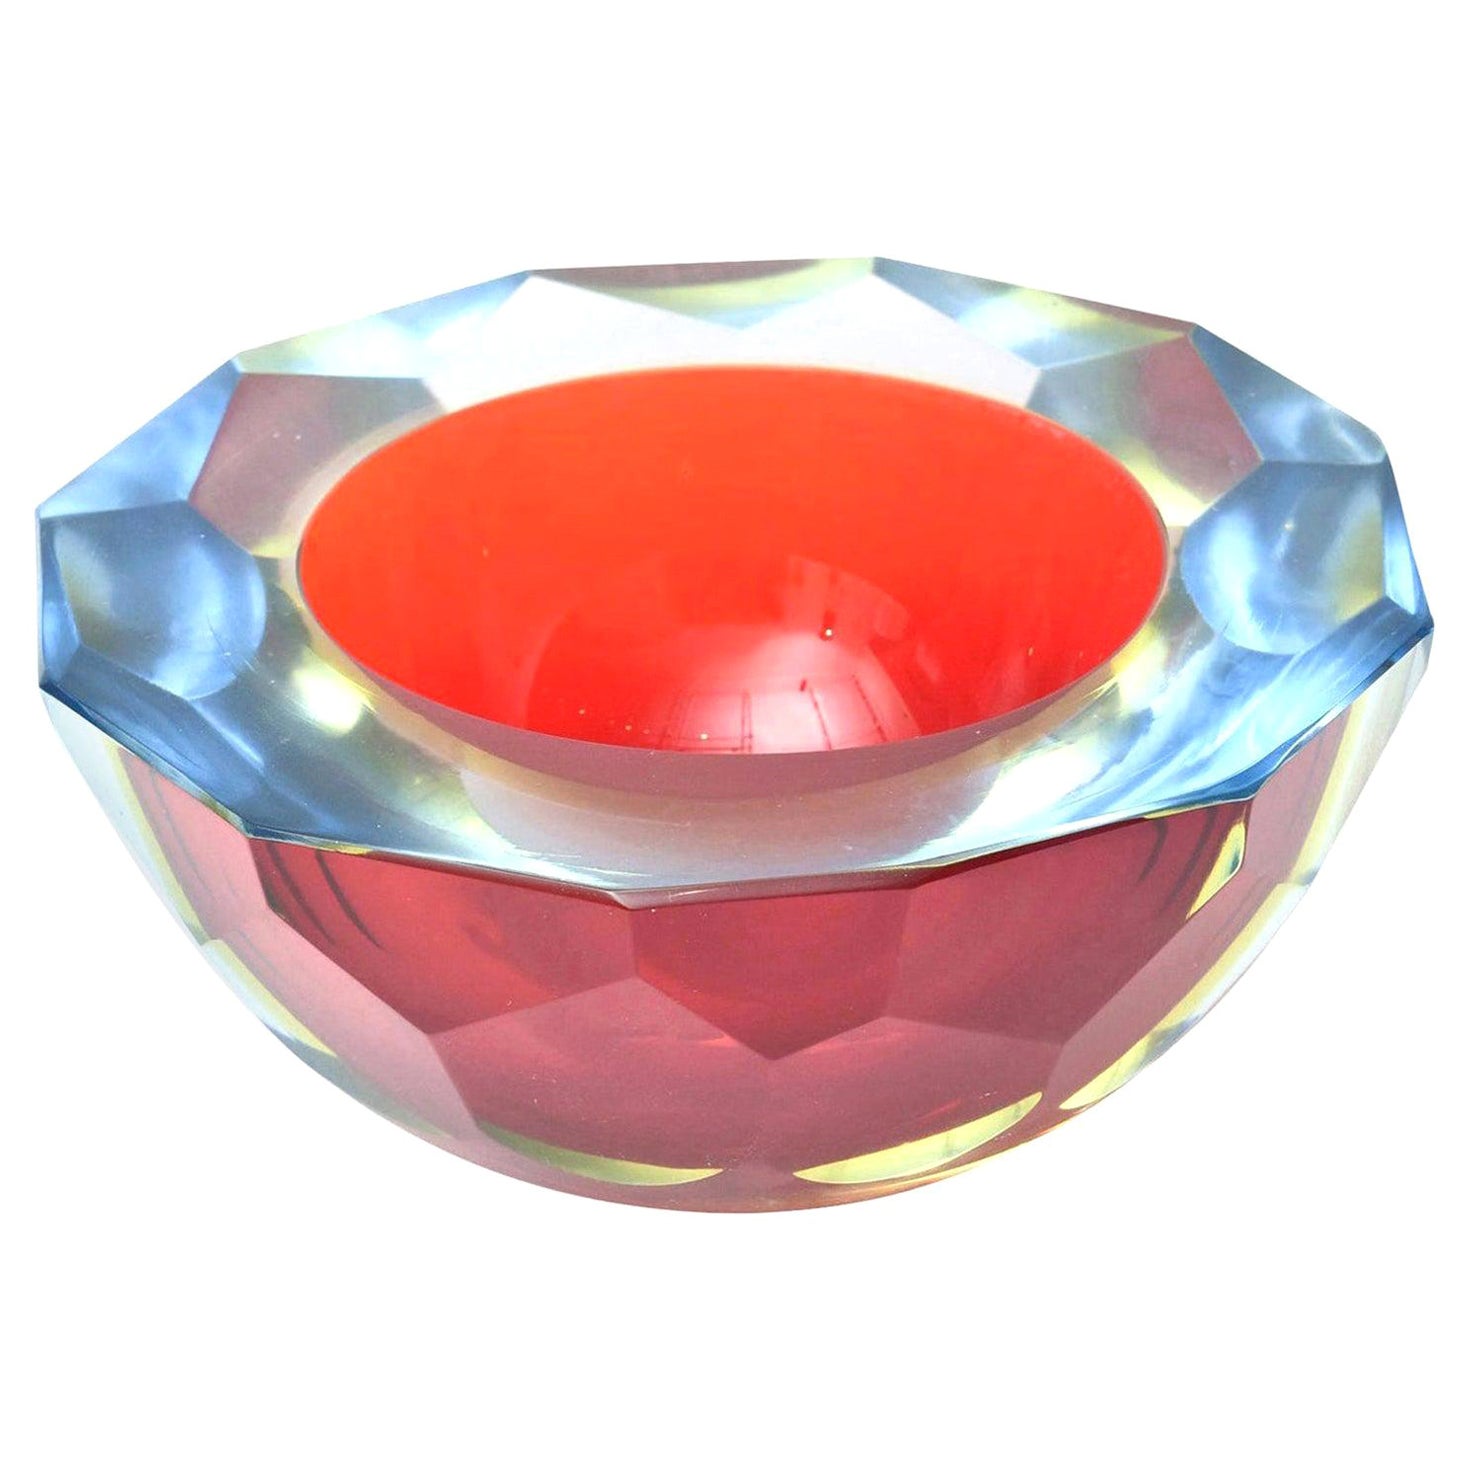 Murano Mandruzzato Red, Blue Sommerso Diamond Faceted Geode Glass Bowl  Vintage